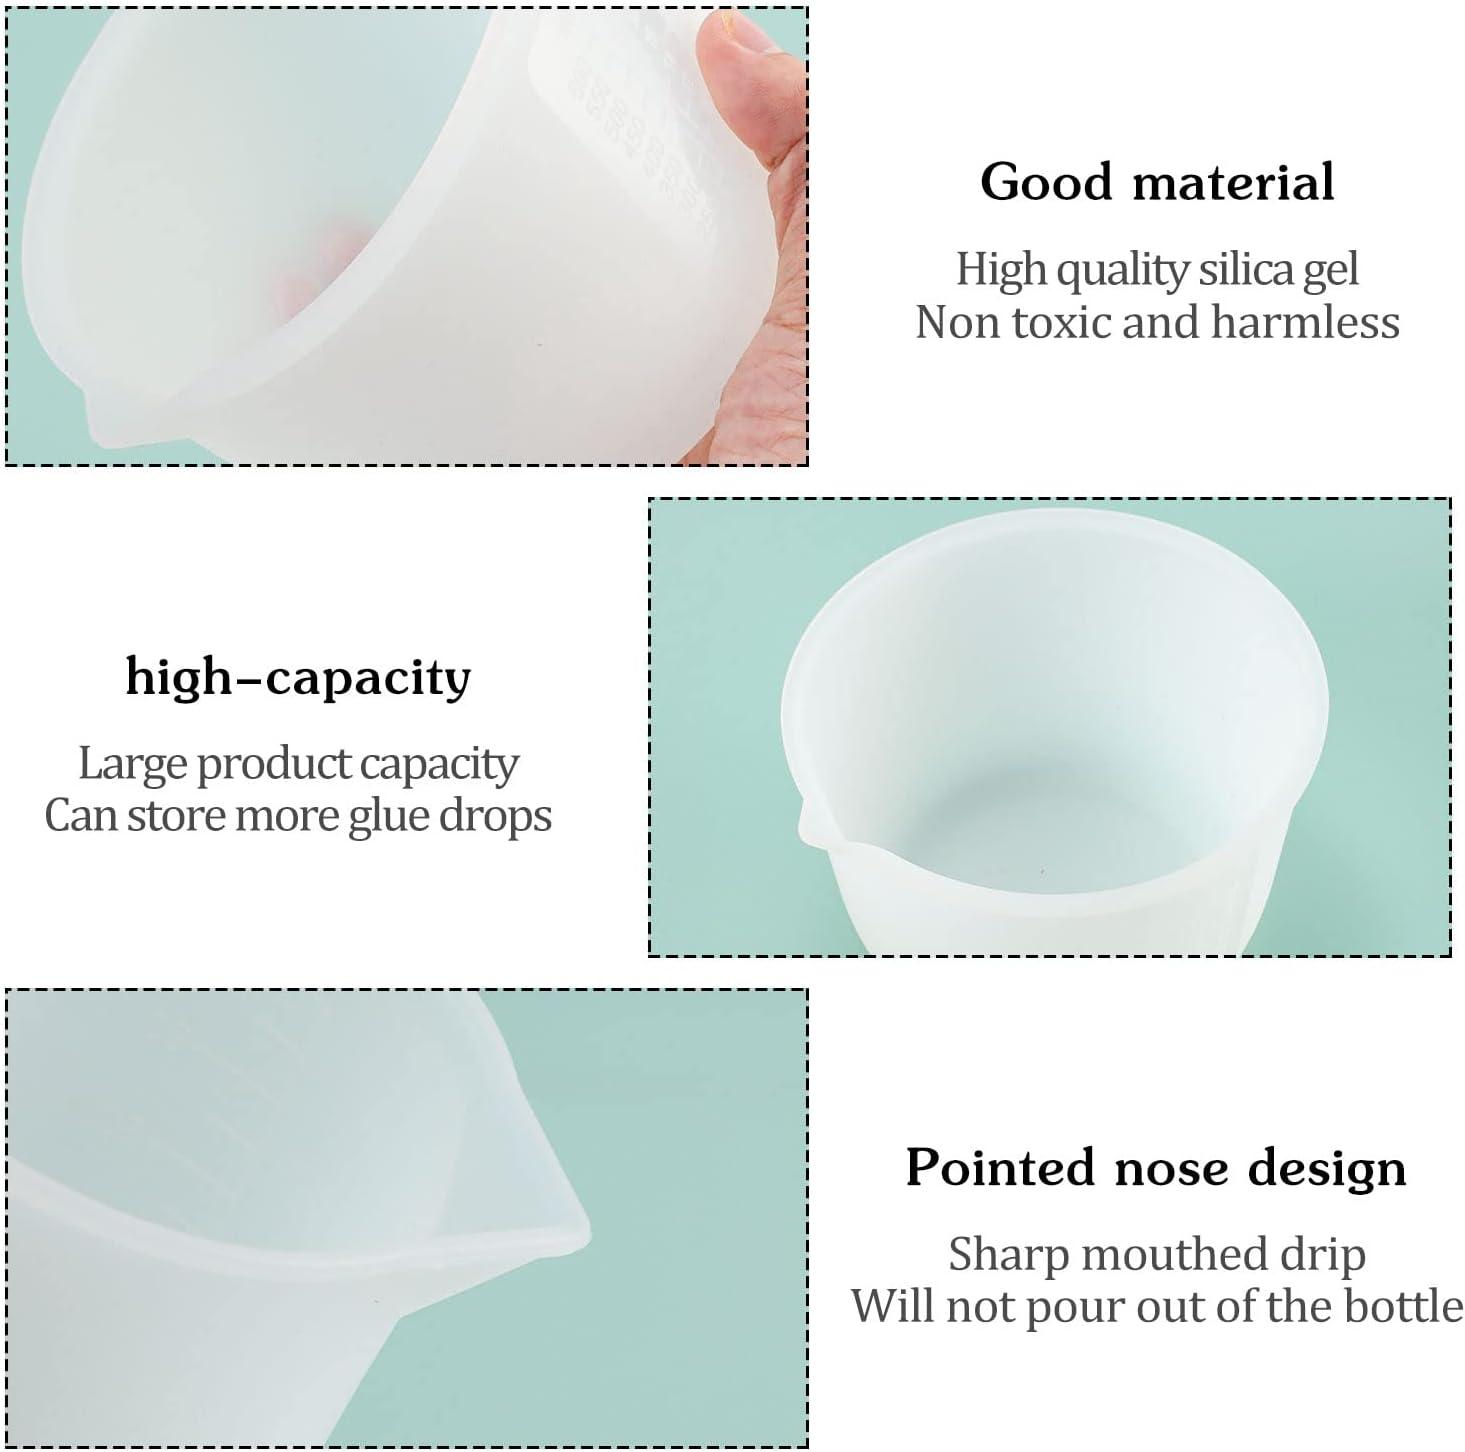 Silicone Measuring Cups for Resin Supplies, Resin Cups Kit with 600ml &  100ml Resin Mixing Cups and Tools, Silicone Cups for Resin Molds, Epoxy  Resin